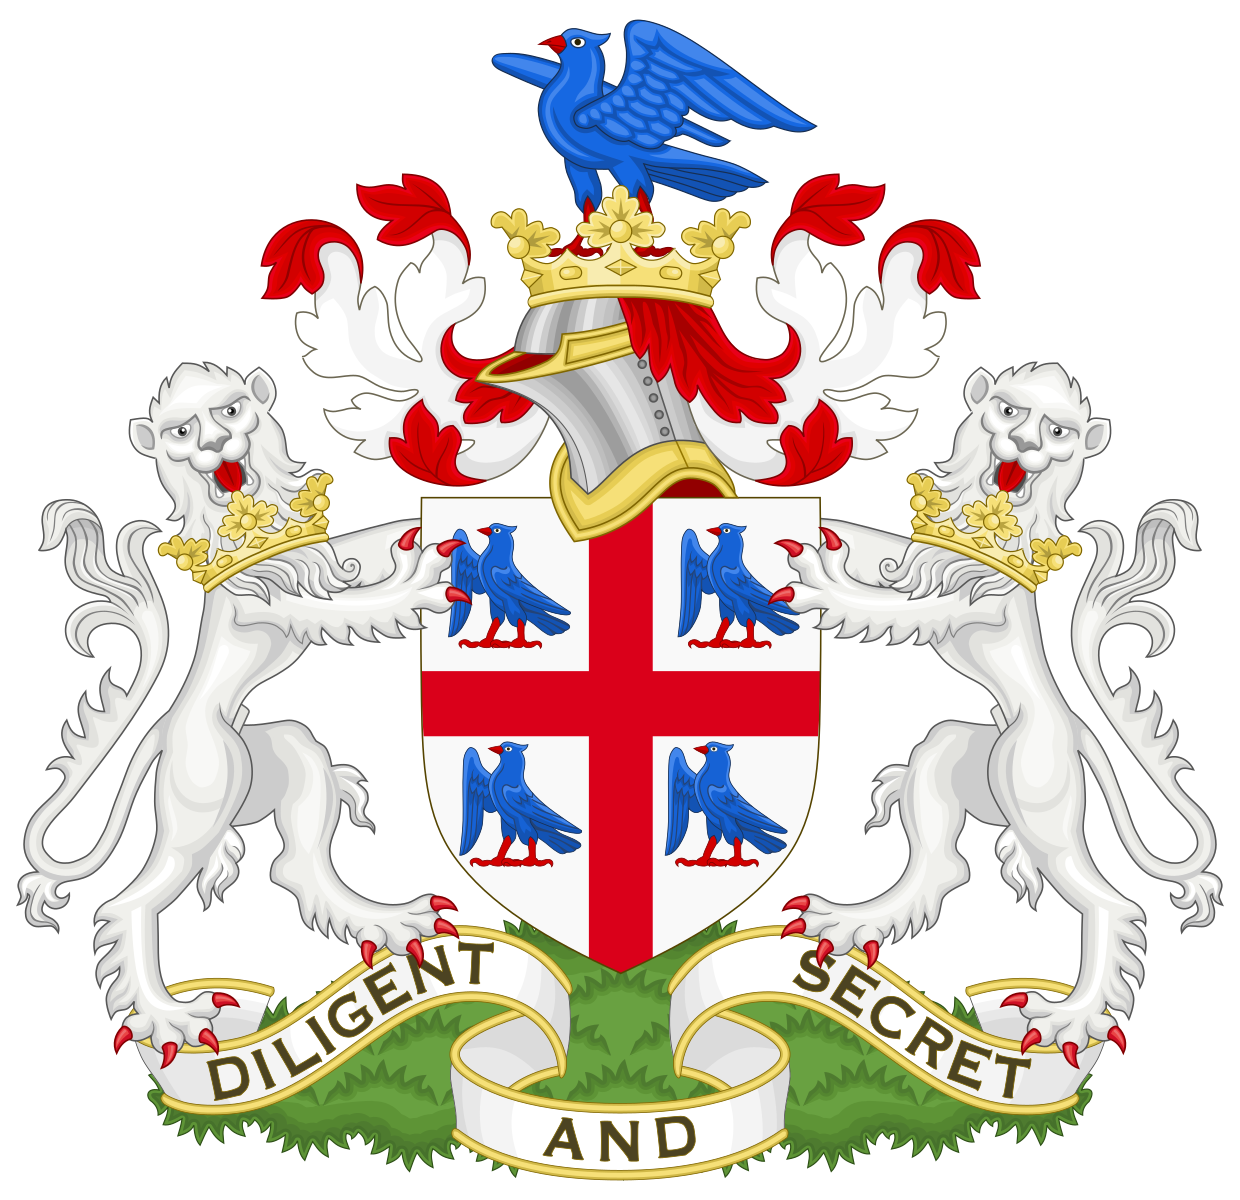 source: https://commons.wikimedia.org/wiki/File:Coat_of_Arms_of_the_College_of_Arms.svg